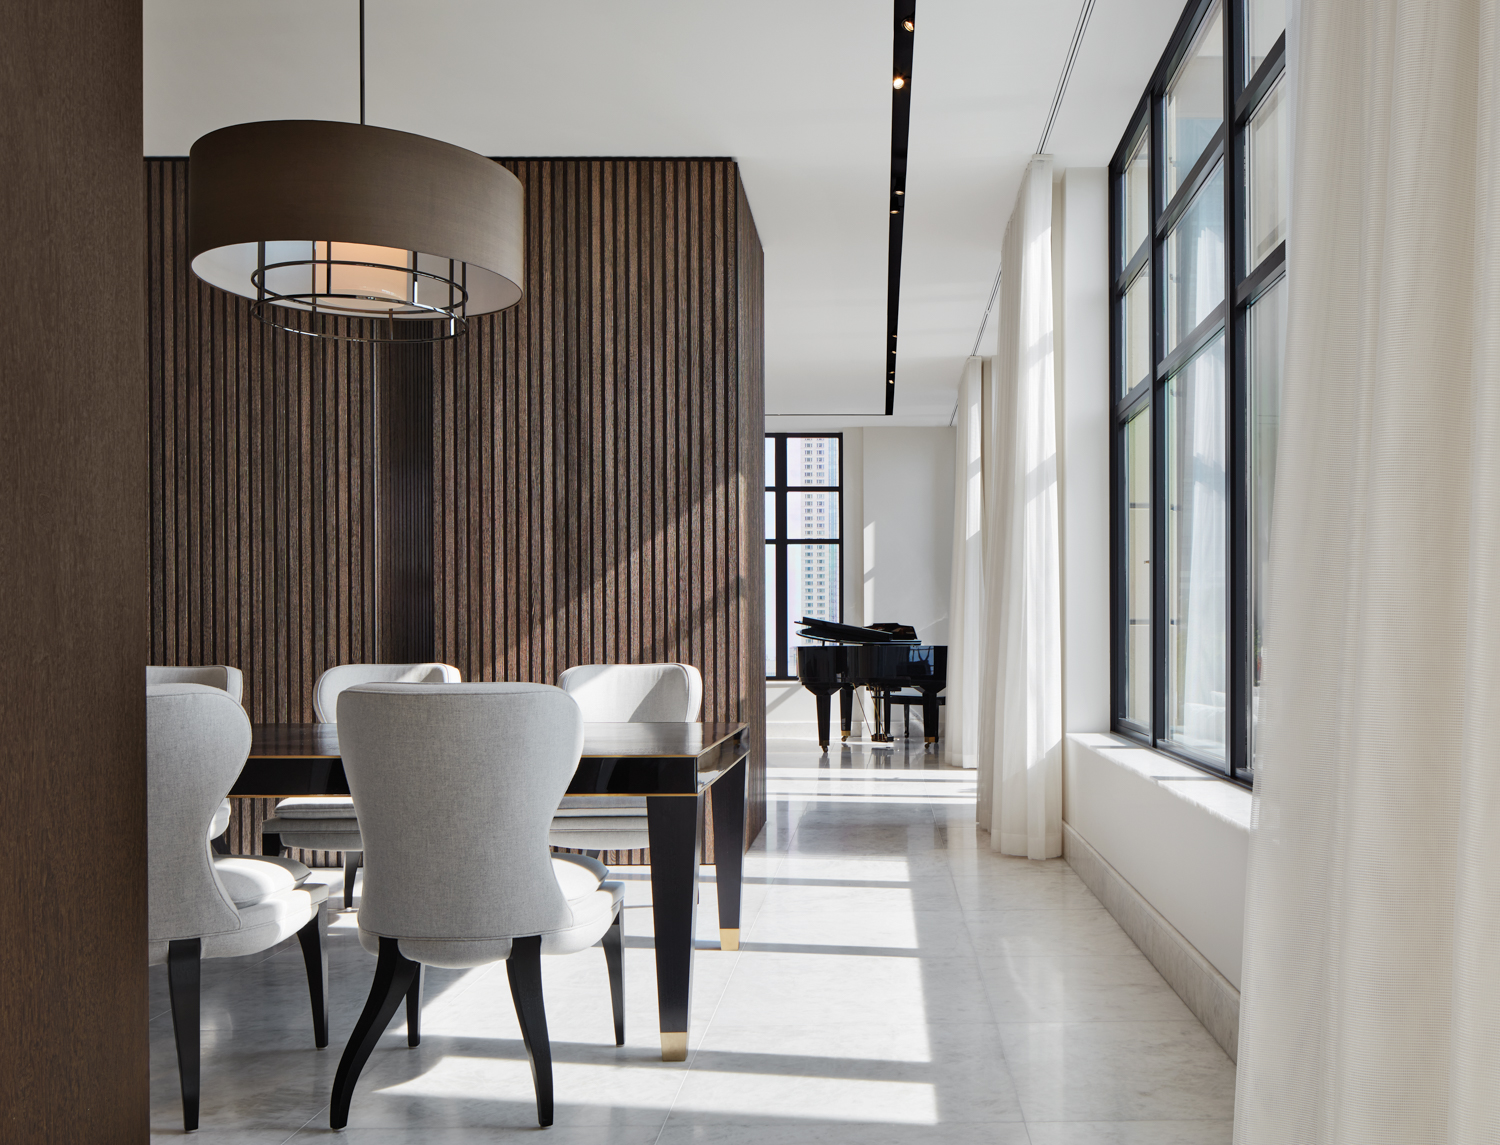 A dining room with wood-slatted walls.